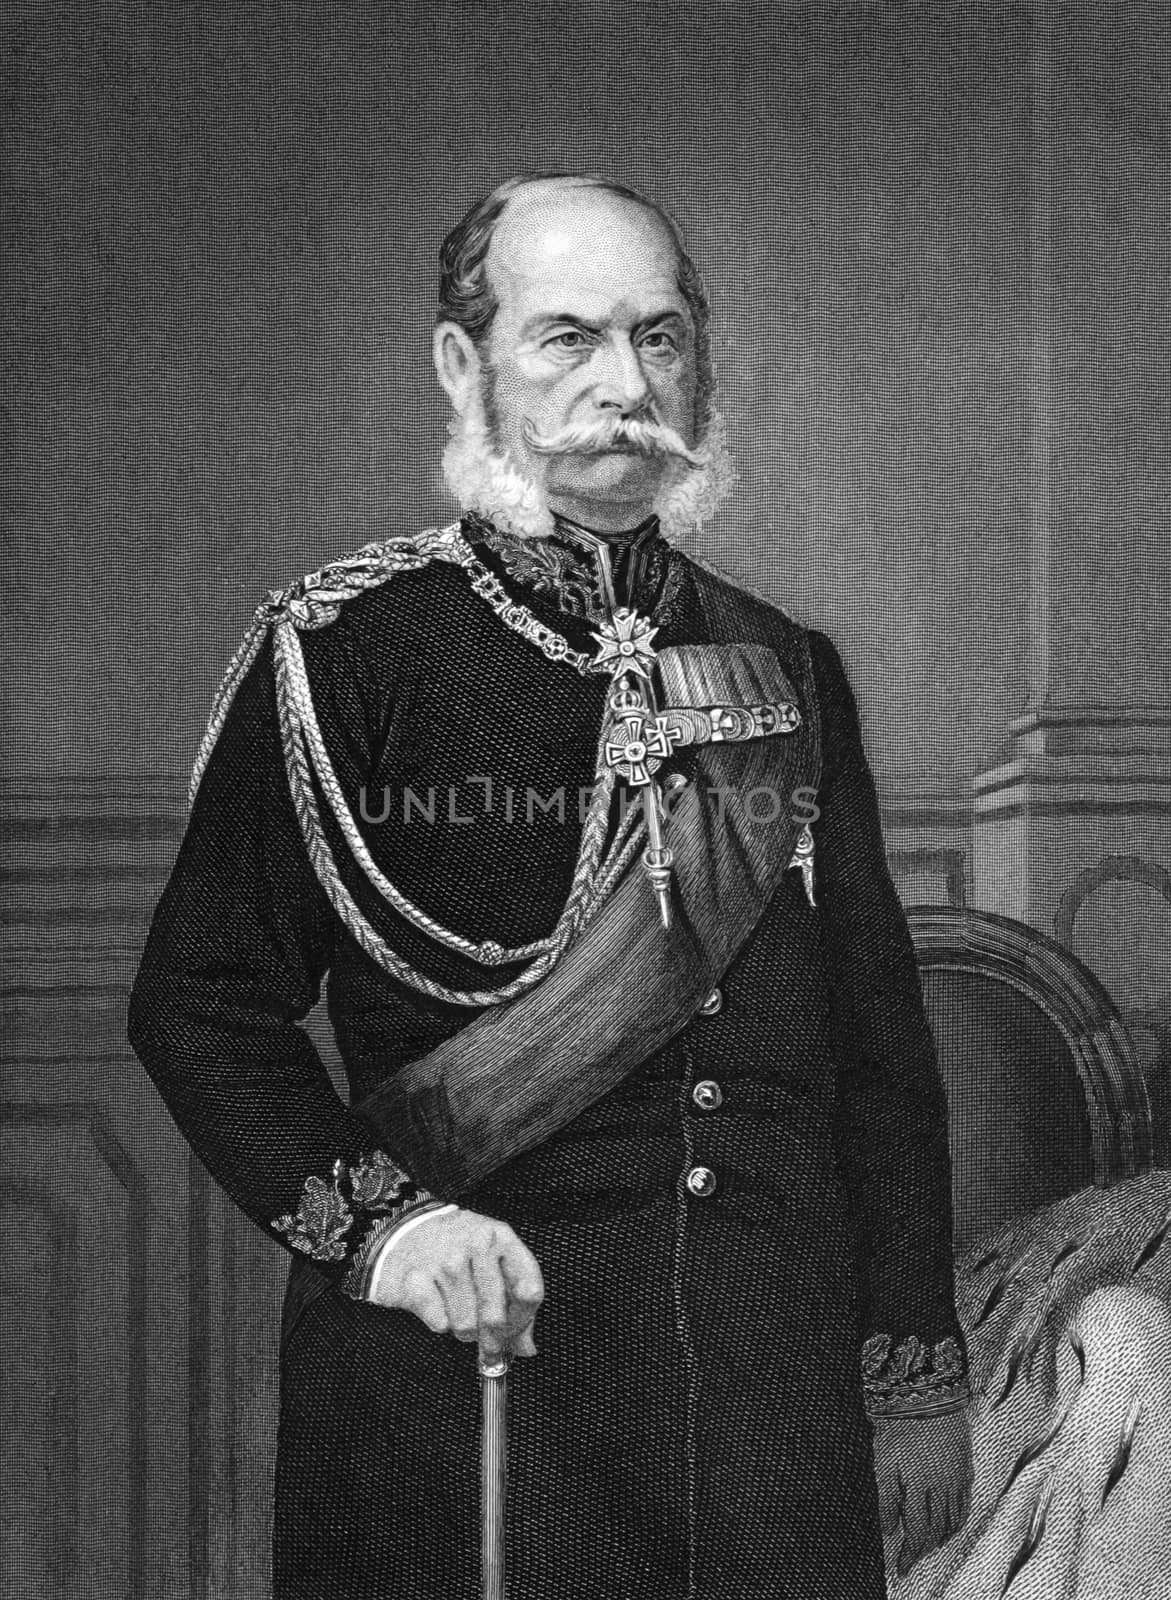 William I, German Emperor (1797-1888) on engraving from 1873. King of Prussia during 1861-1888 and the first German Emperor during 1871-1888. Engraved by unknown artist and published in ''Portrait Gallery of Eminent Men and Women with Biographies'',USA,1873.